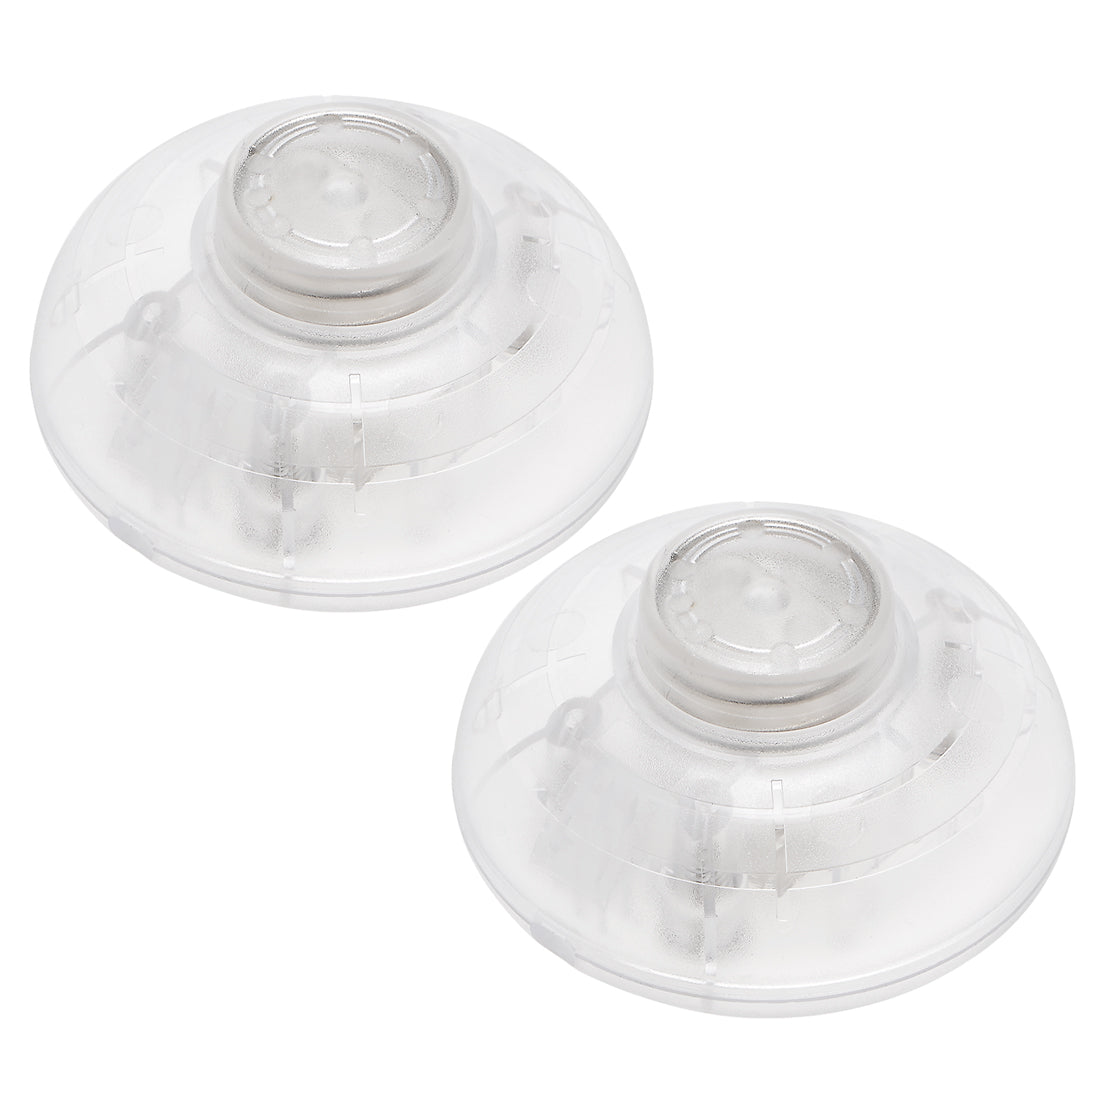 Uxcell Uxcell Inline Foot Pedal Push Button Switch, Round Lamp Lighting Foot Control Latching ON/Off Footswitch Transparent 2 Pcs